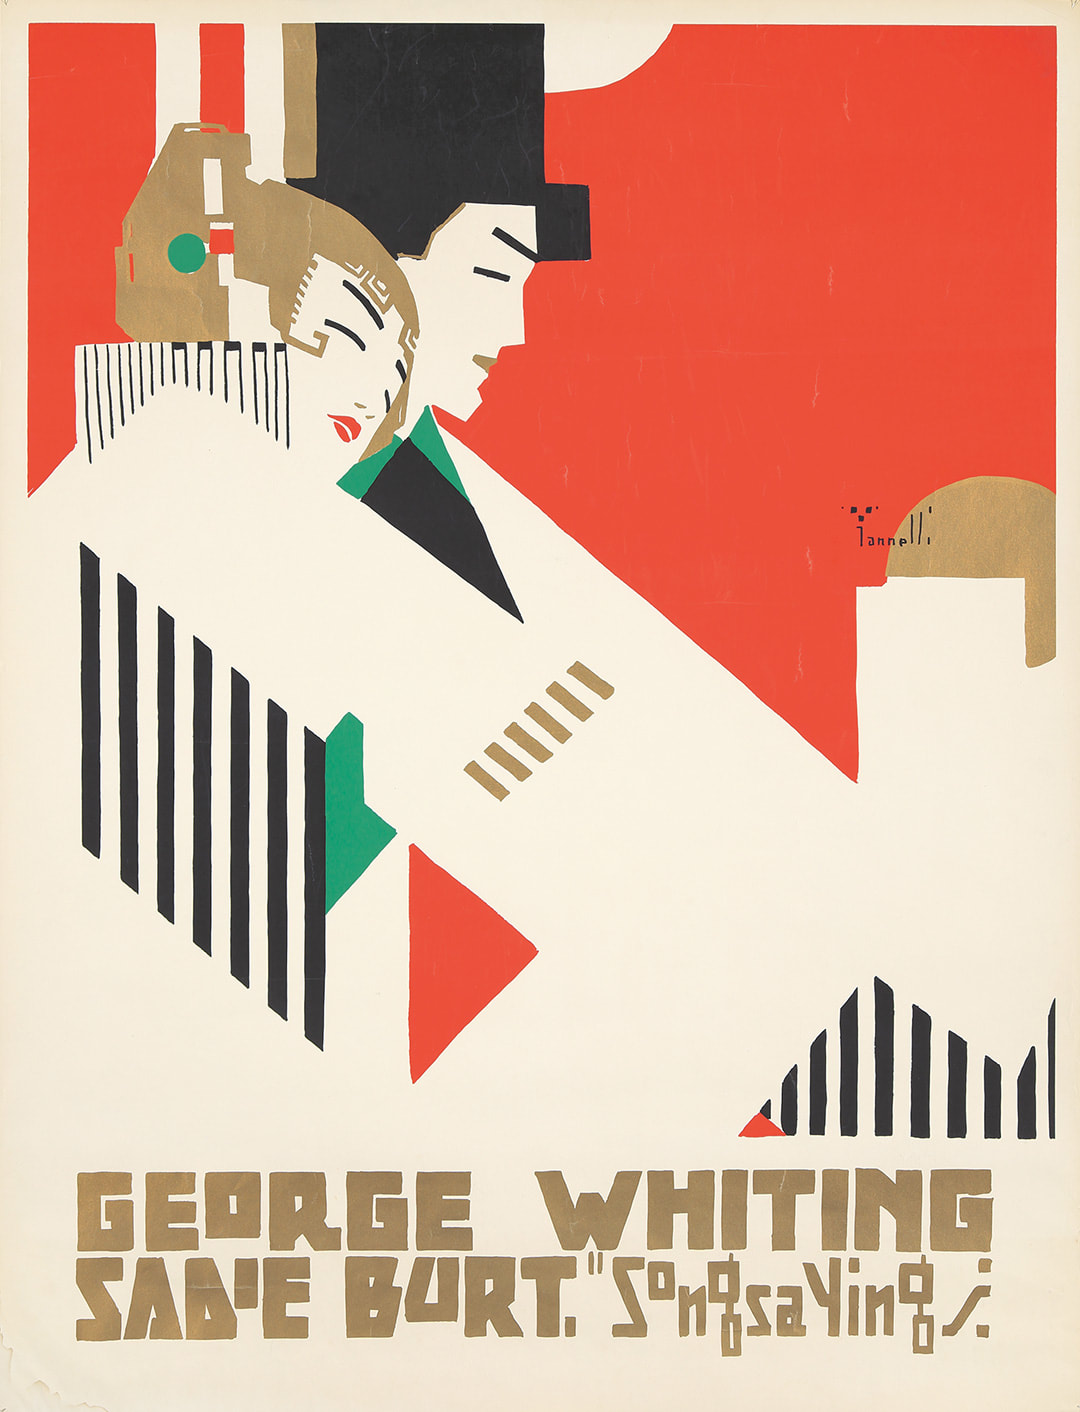 Ad by Alfonso Iannelli. Hand-painted sign outside the Orpheum Theater in Chicago promoting a performance in January 1915. Reprinted as a poster entitled "George Whiting. 1969" after his Iannelli's death.